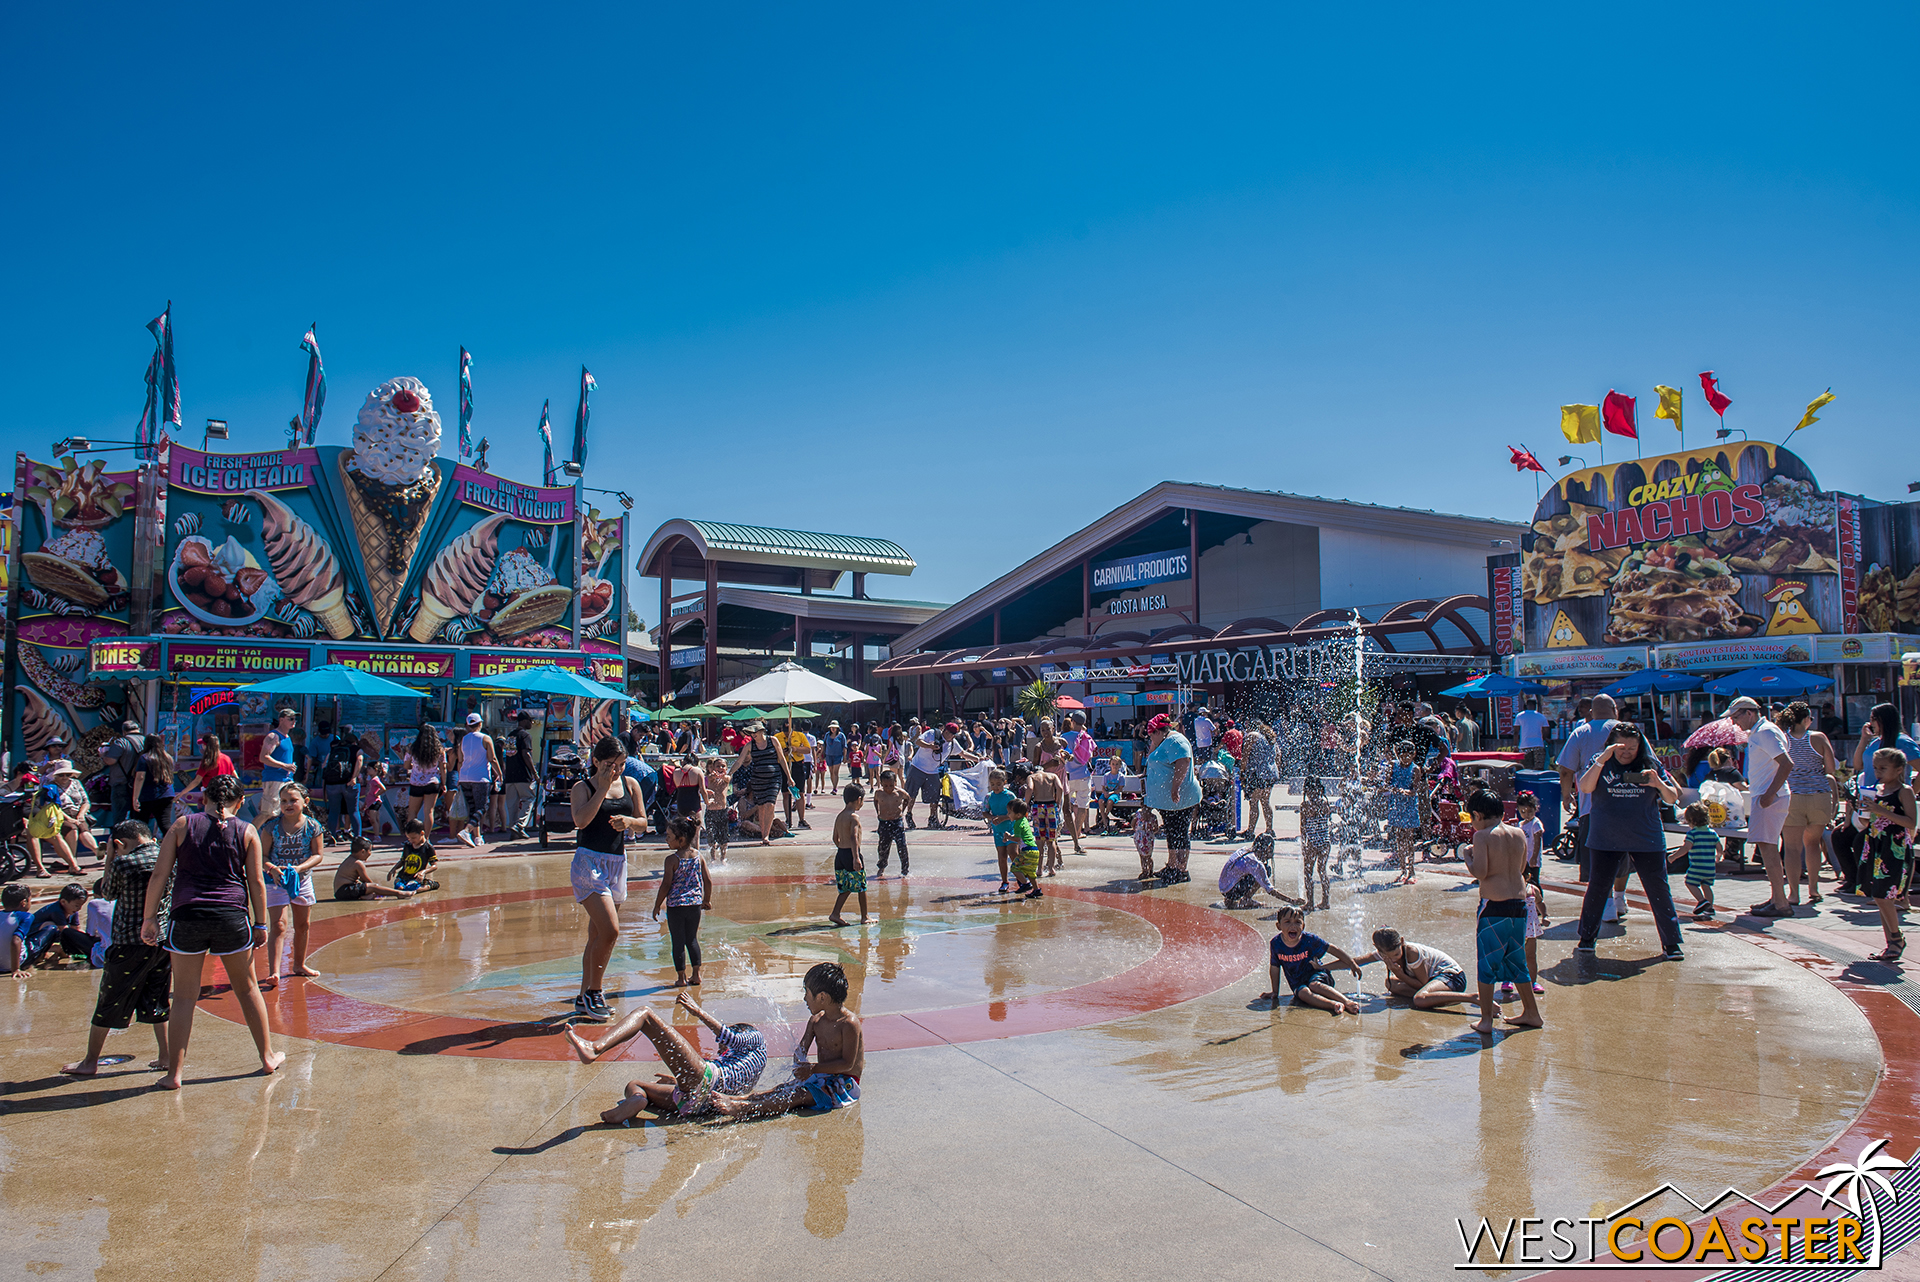  The fountain play zone in front of the Hangar is a popular spot for kids looking to beat the heat.  Germophobes may want to steer clear of the area, though. 